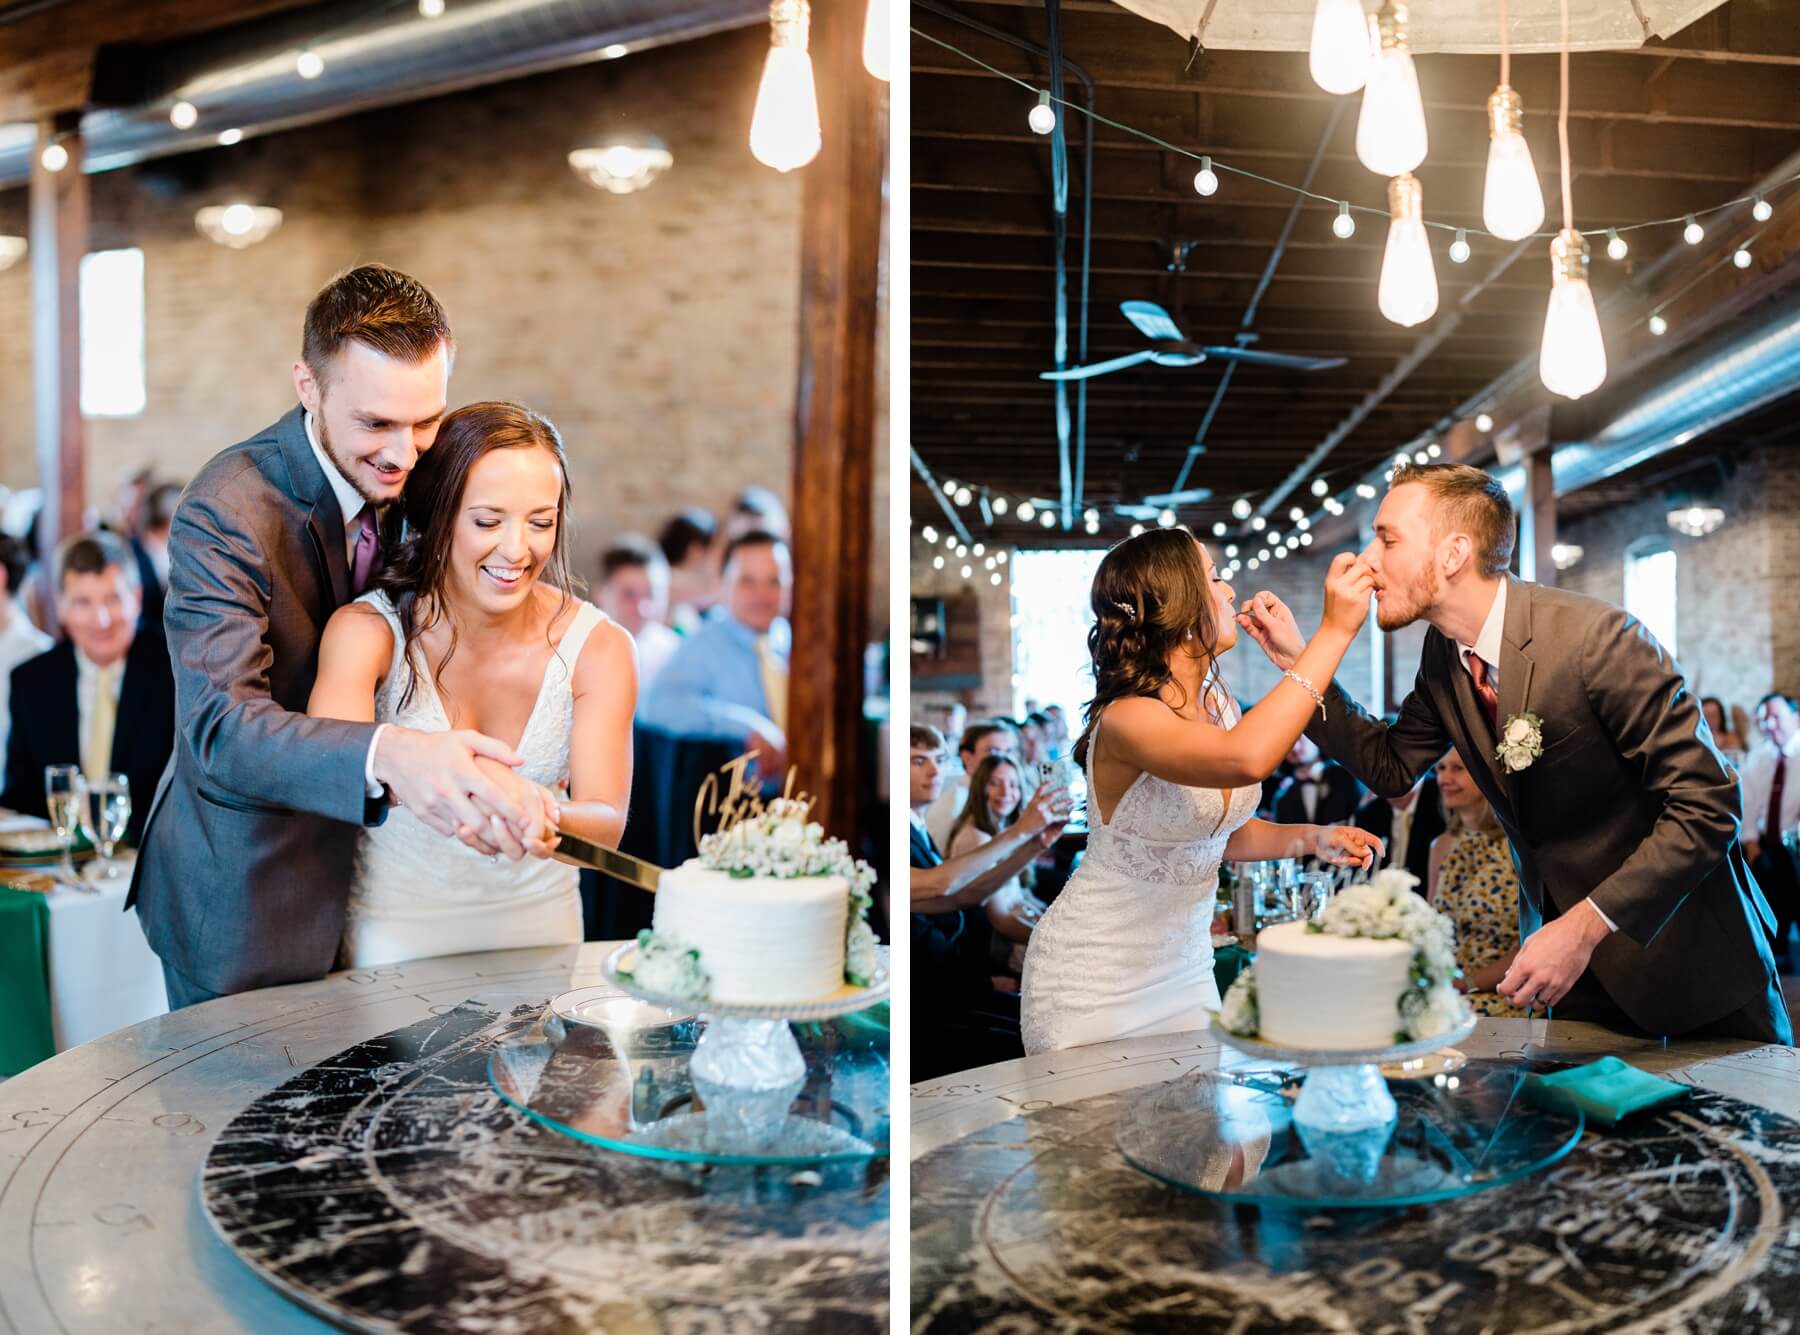 Bride and groom cutting cake and eating it at industrial wedding venue